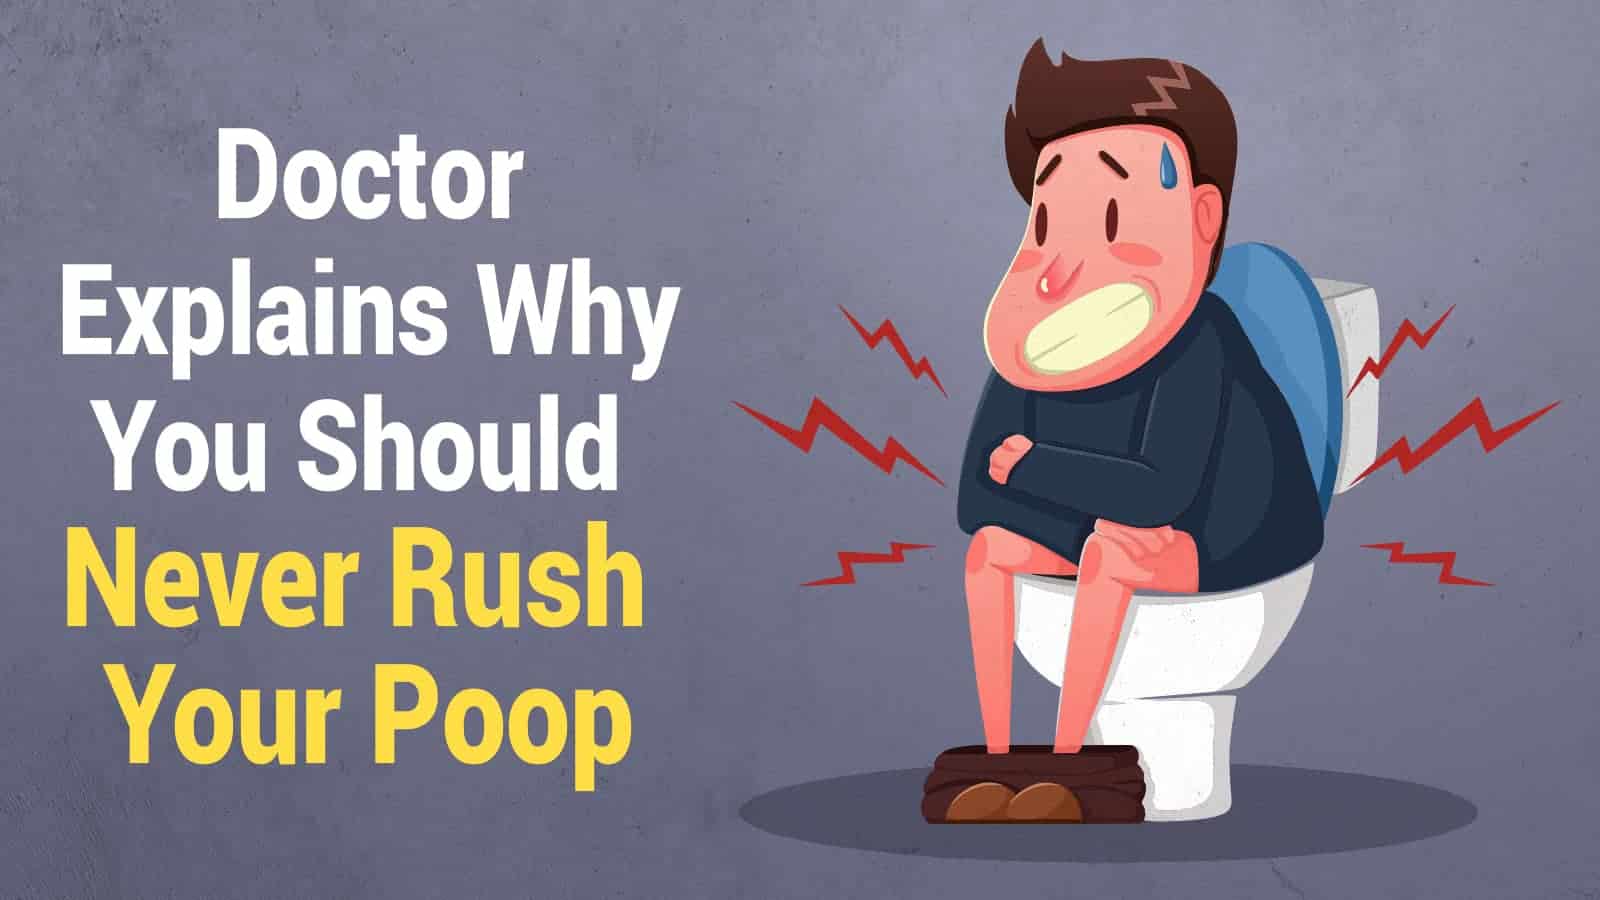 Doctor Explains Why You Should Never Rush Your Poop